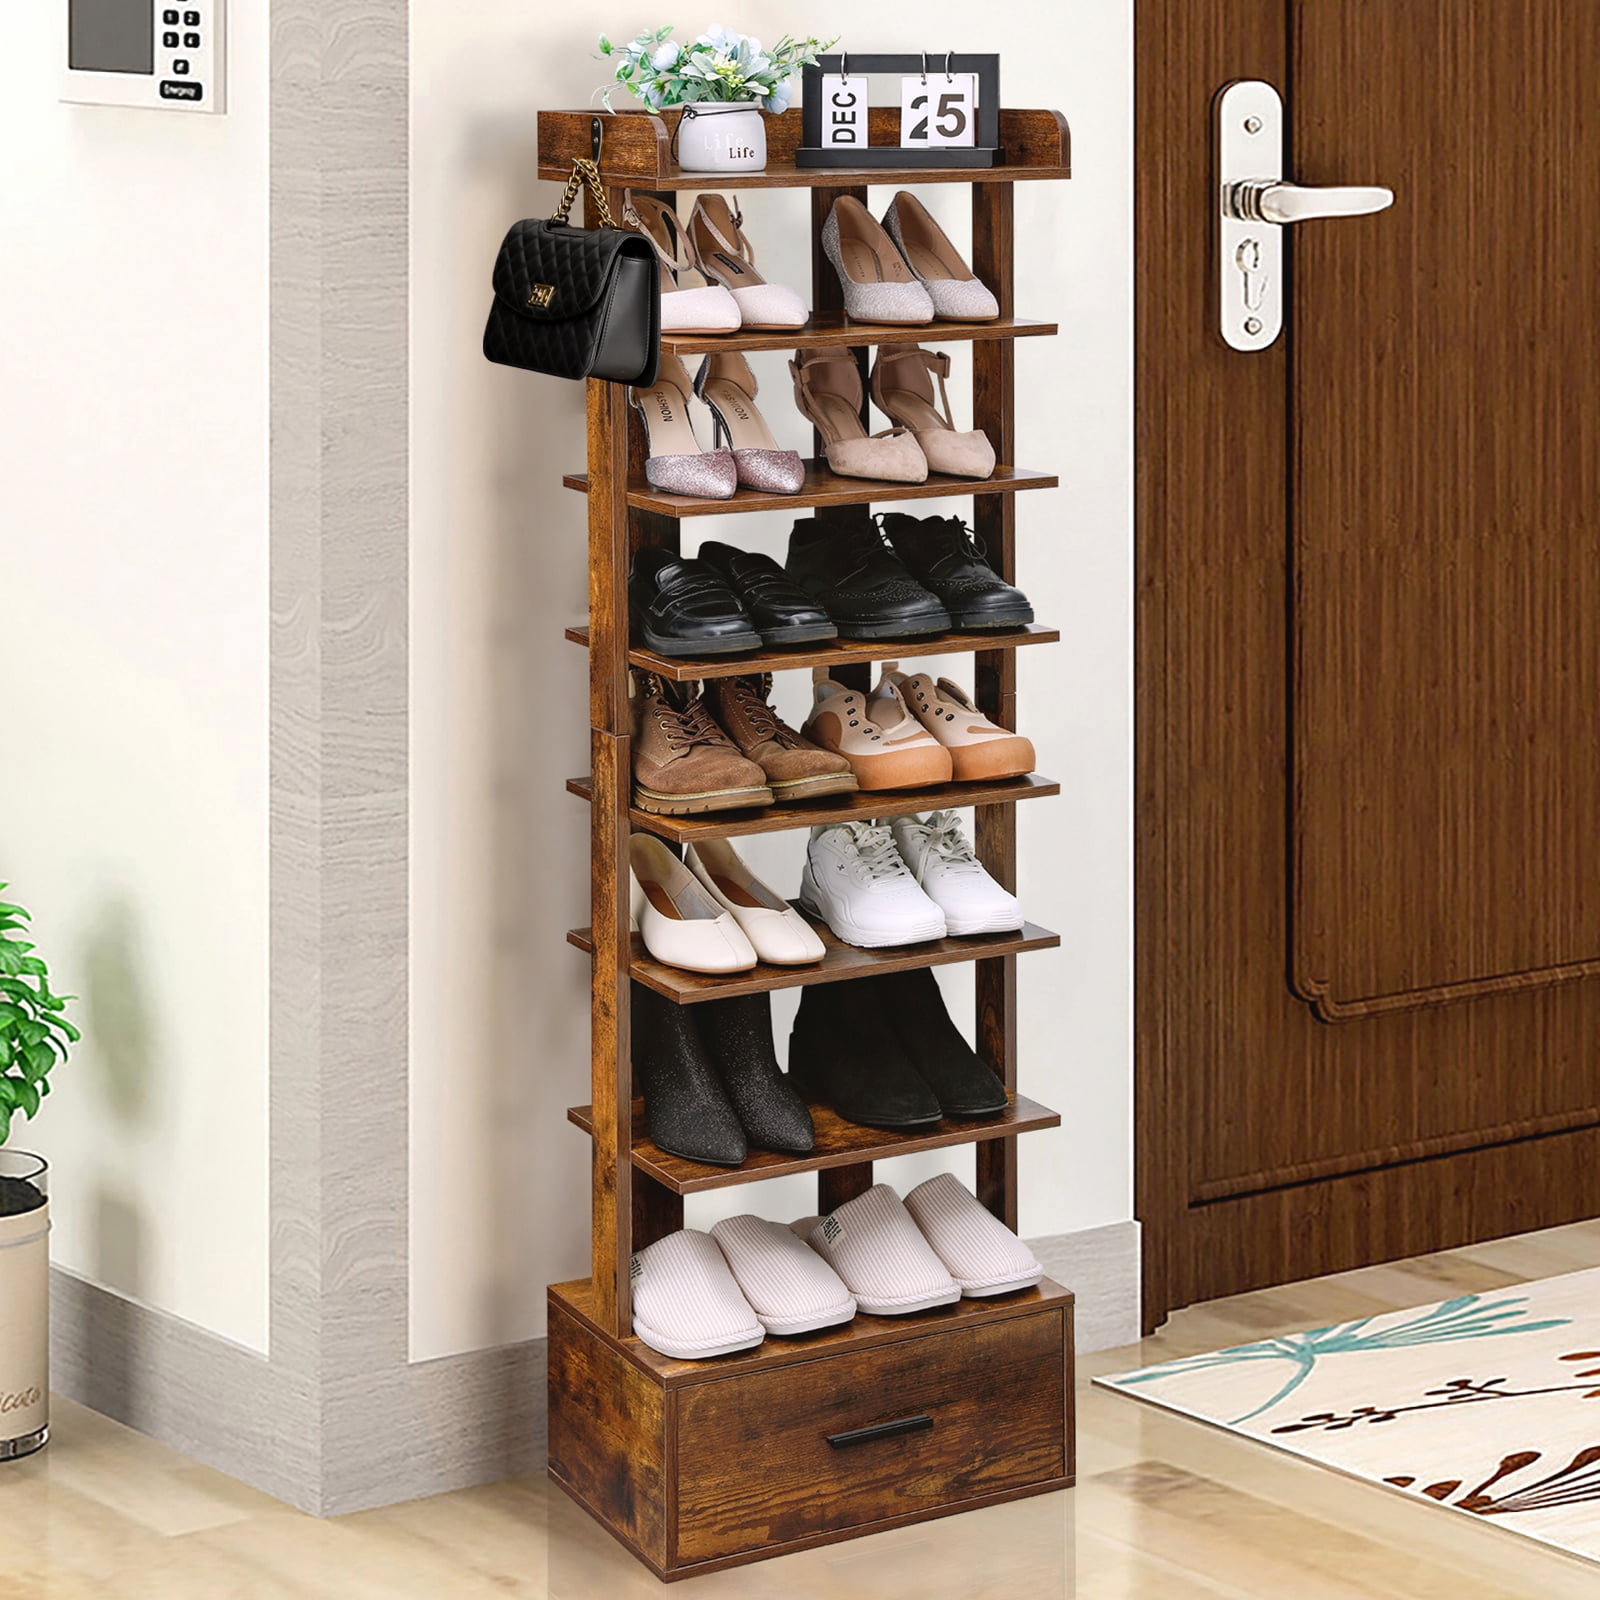 UMBFUN Shoe Rack, 8 Tiers Shoes Rack Organizer for Entryway Hold